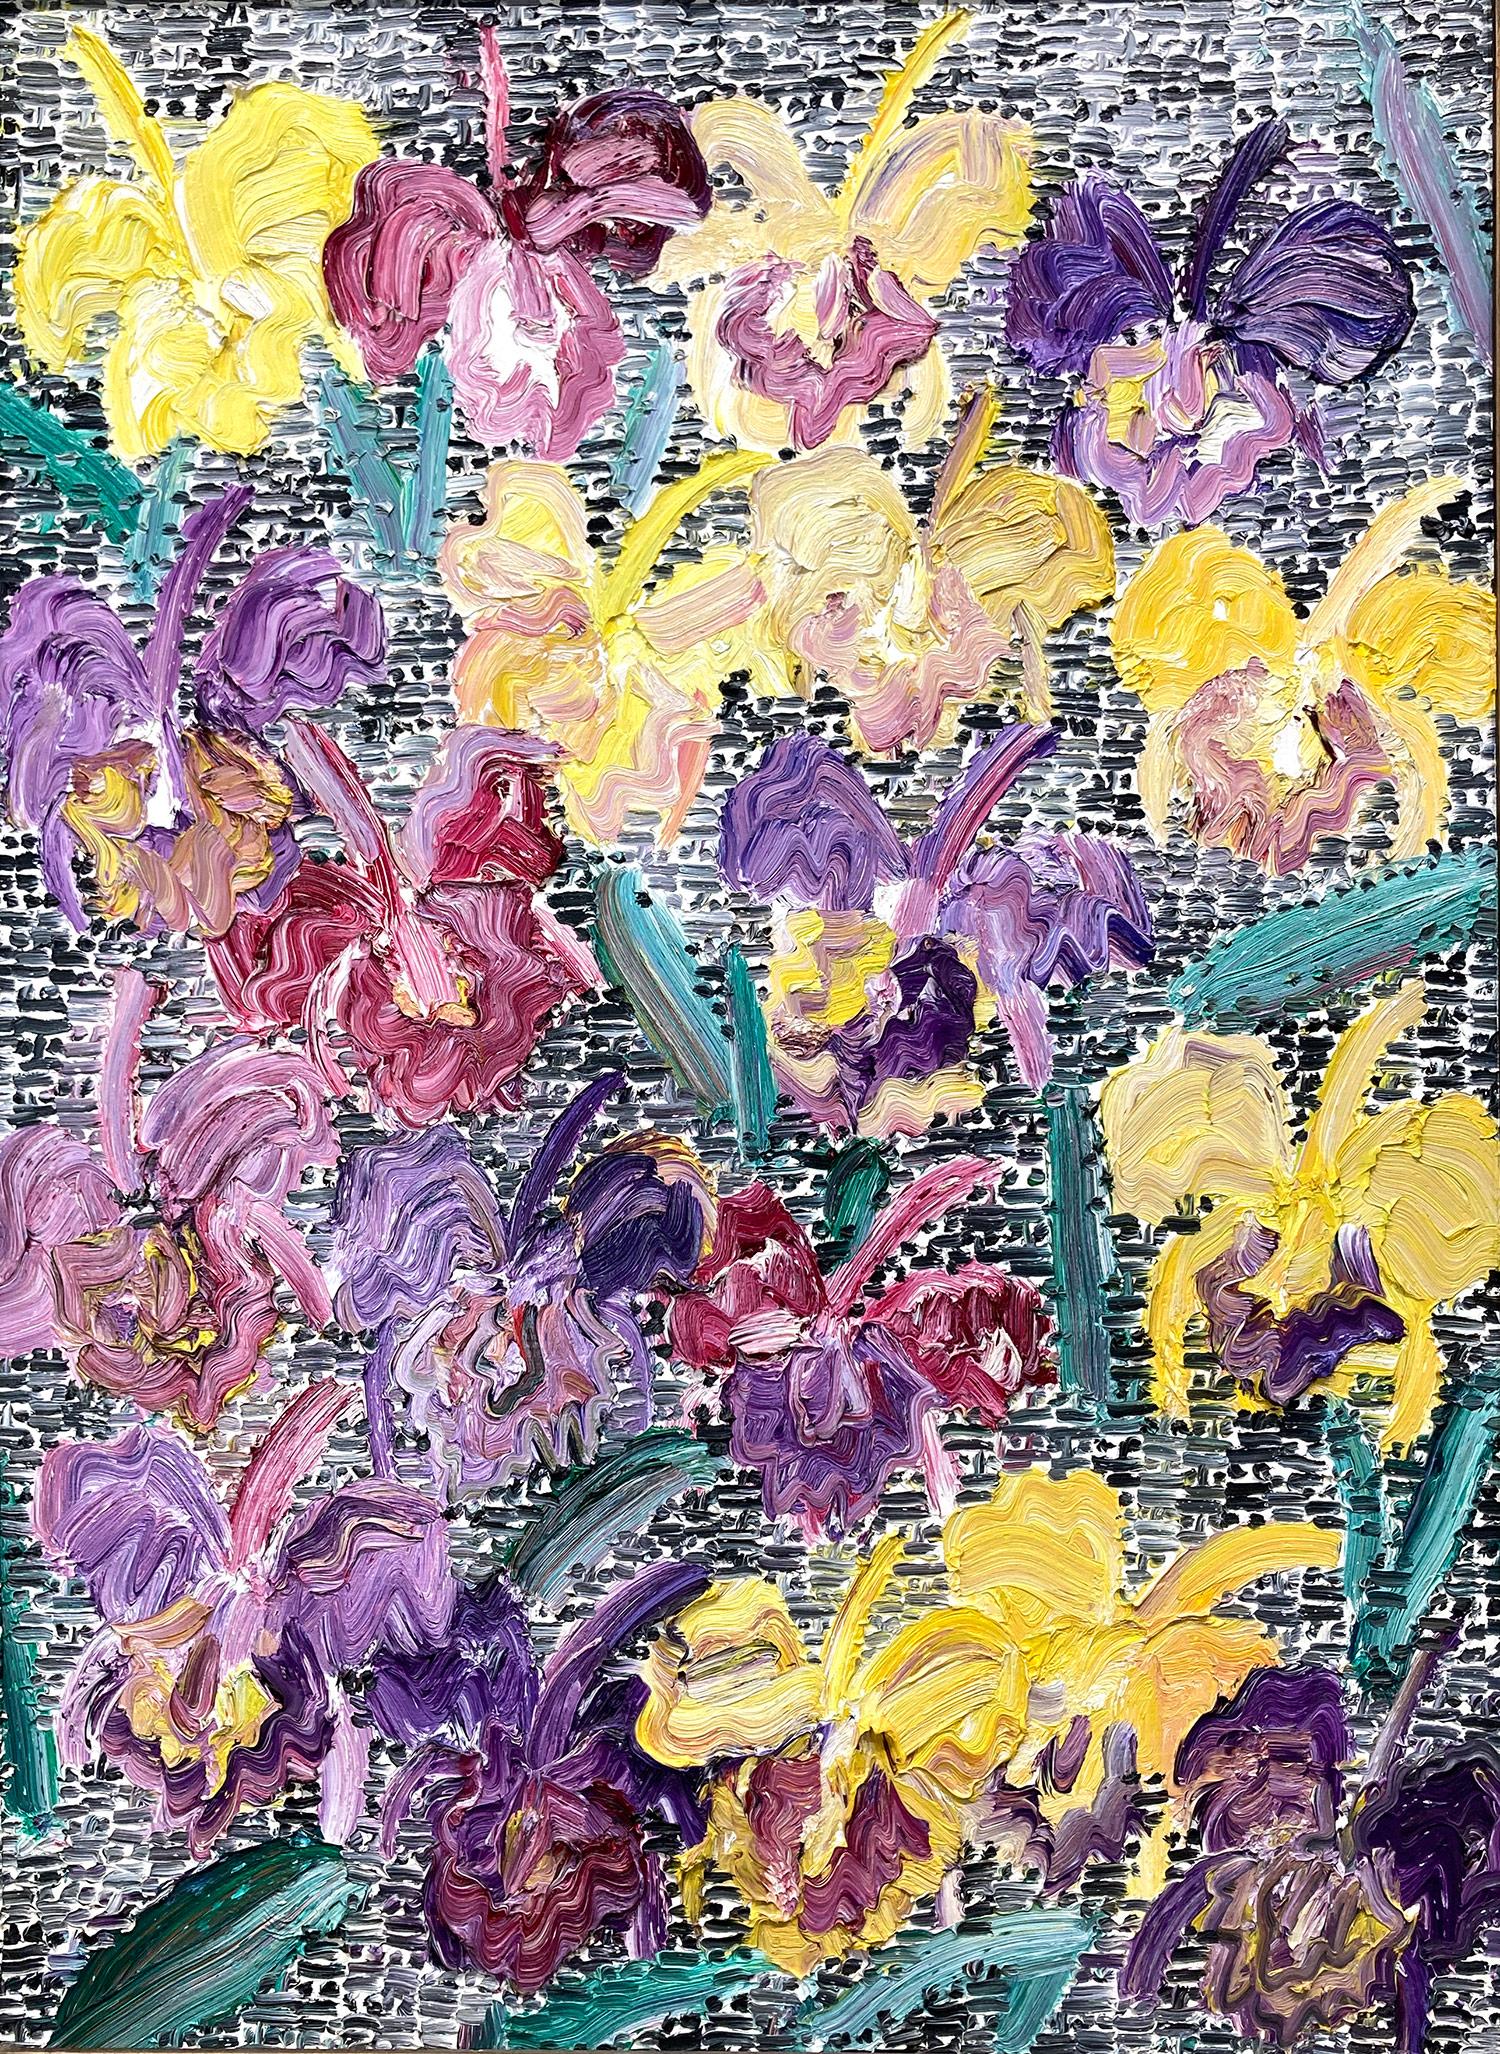 A wonderful composition of one of Slonem's most iconic subjects, Catelayas. This piece depicts a yellow and royal purple flowers placed in a wonderful background with black marks representing the 